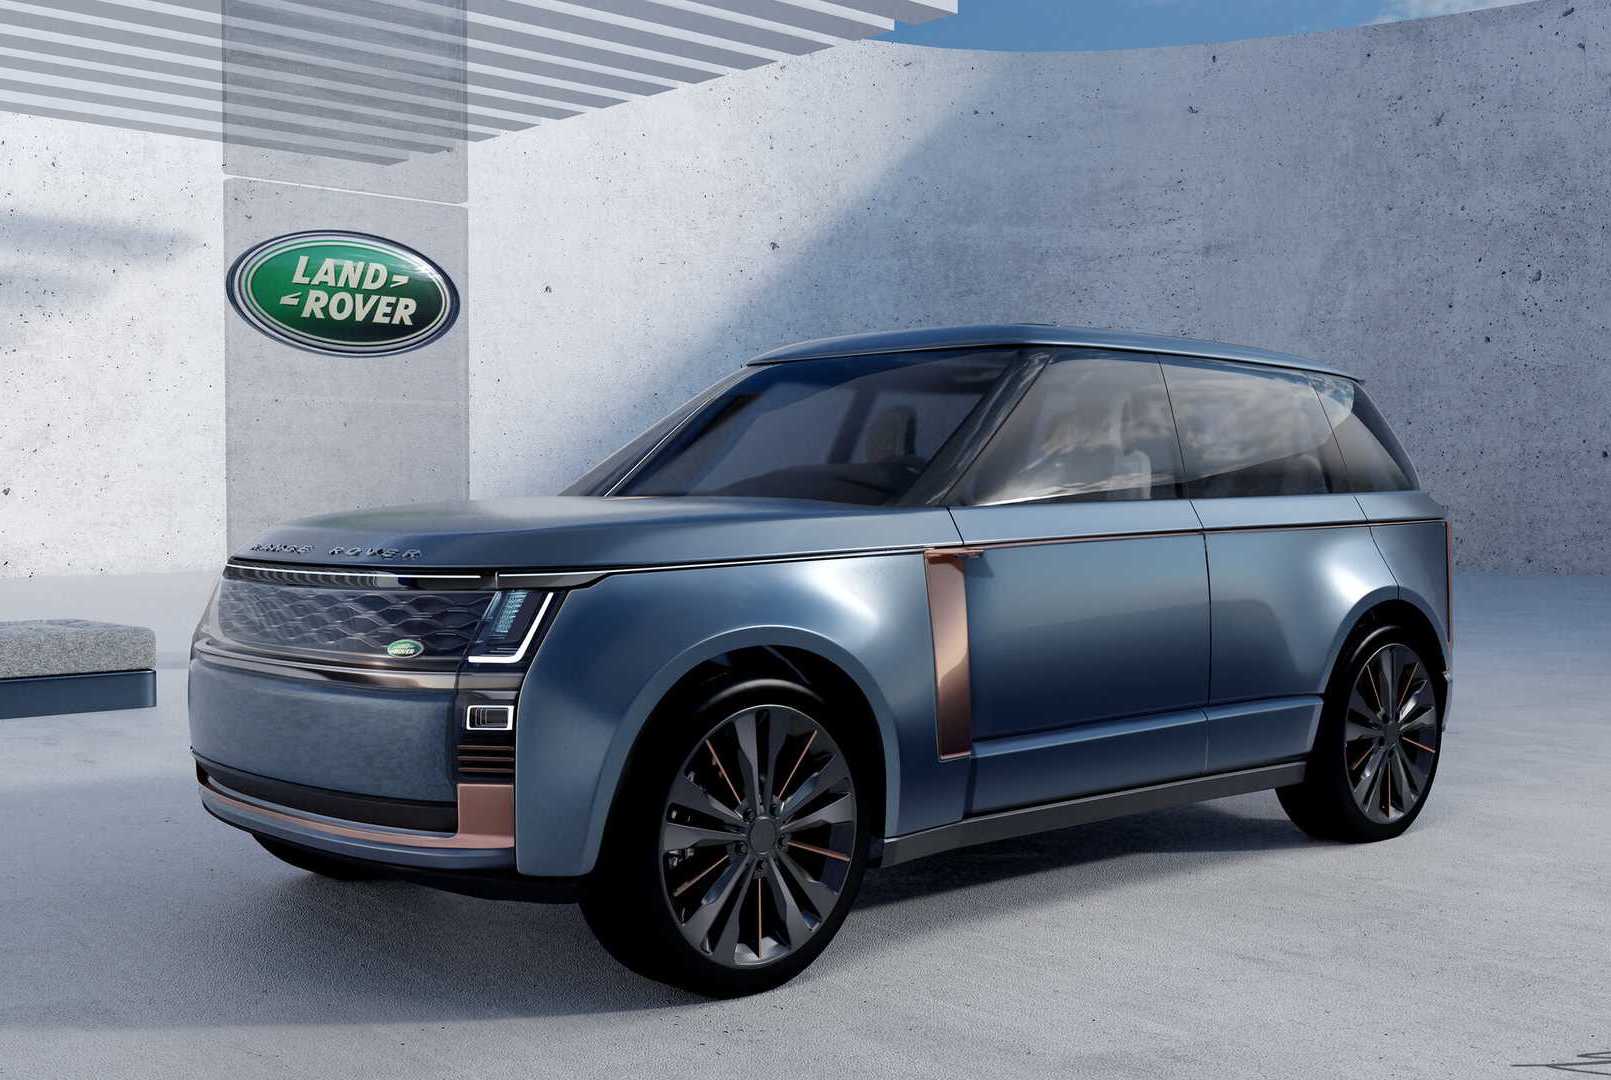 Land Rover Intern Envisions New Range Rover With Suicide Doors